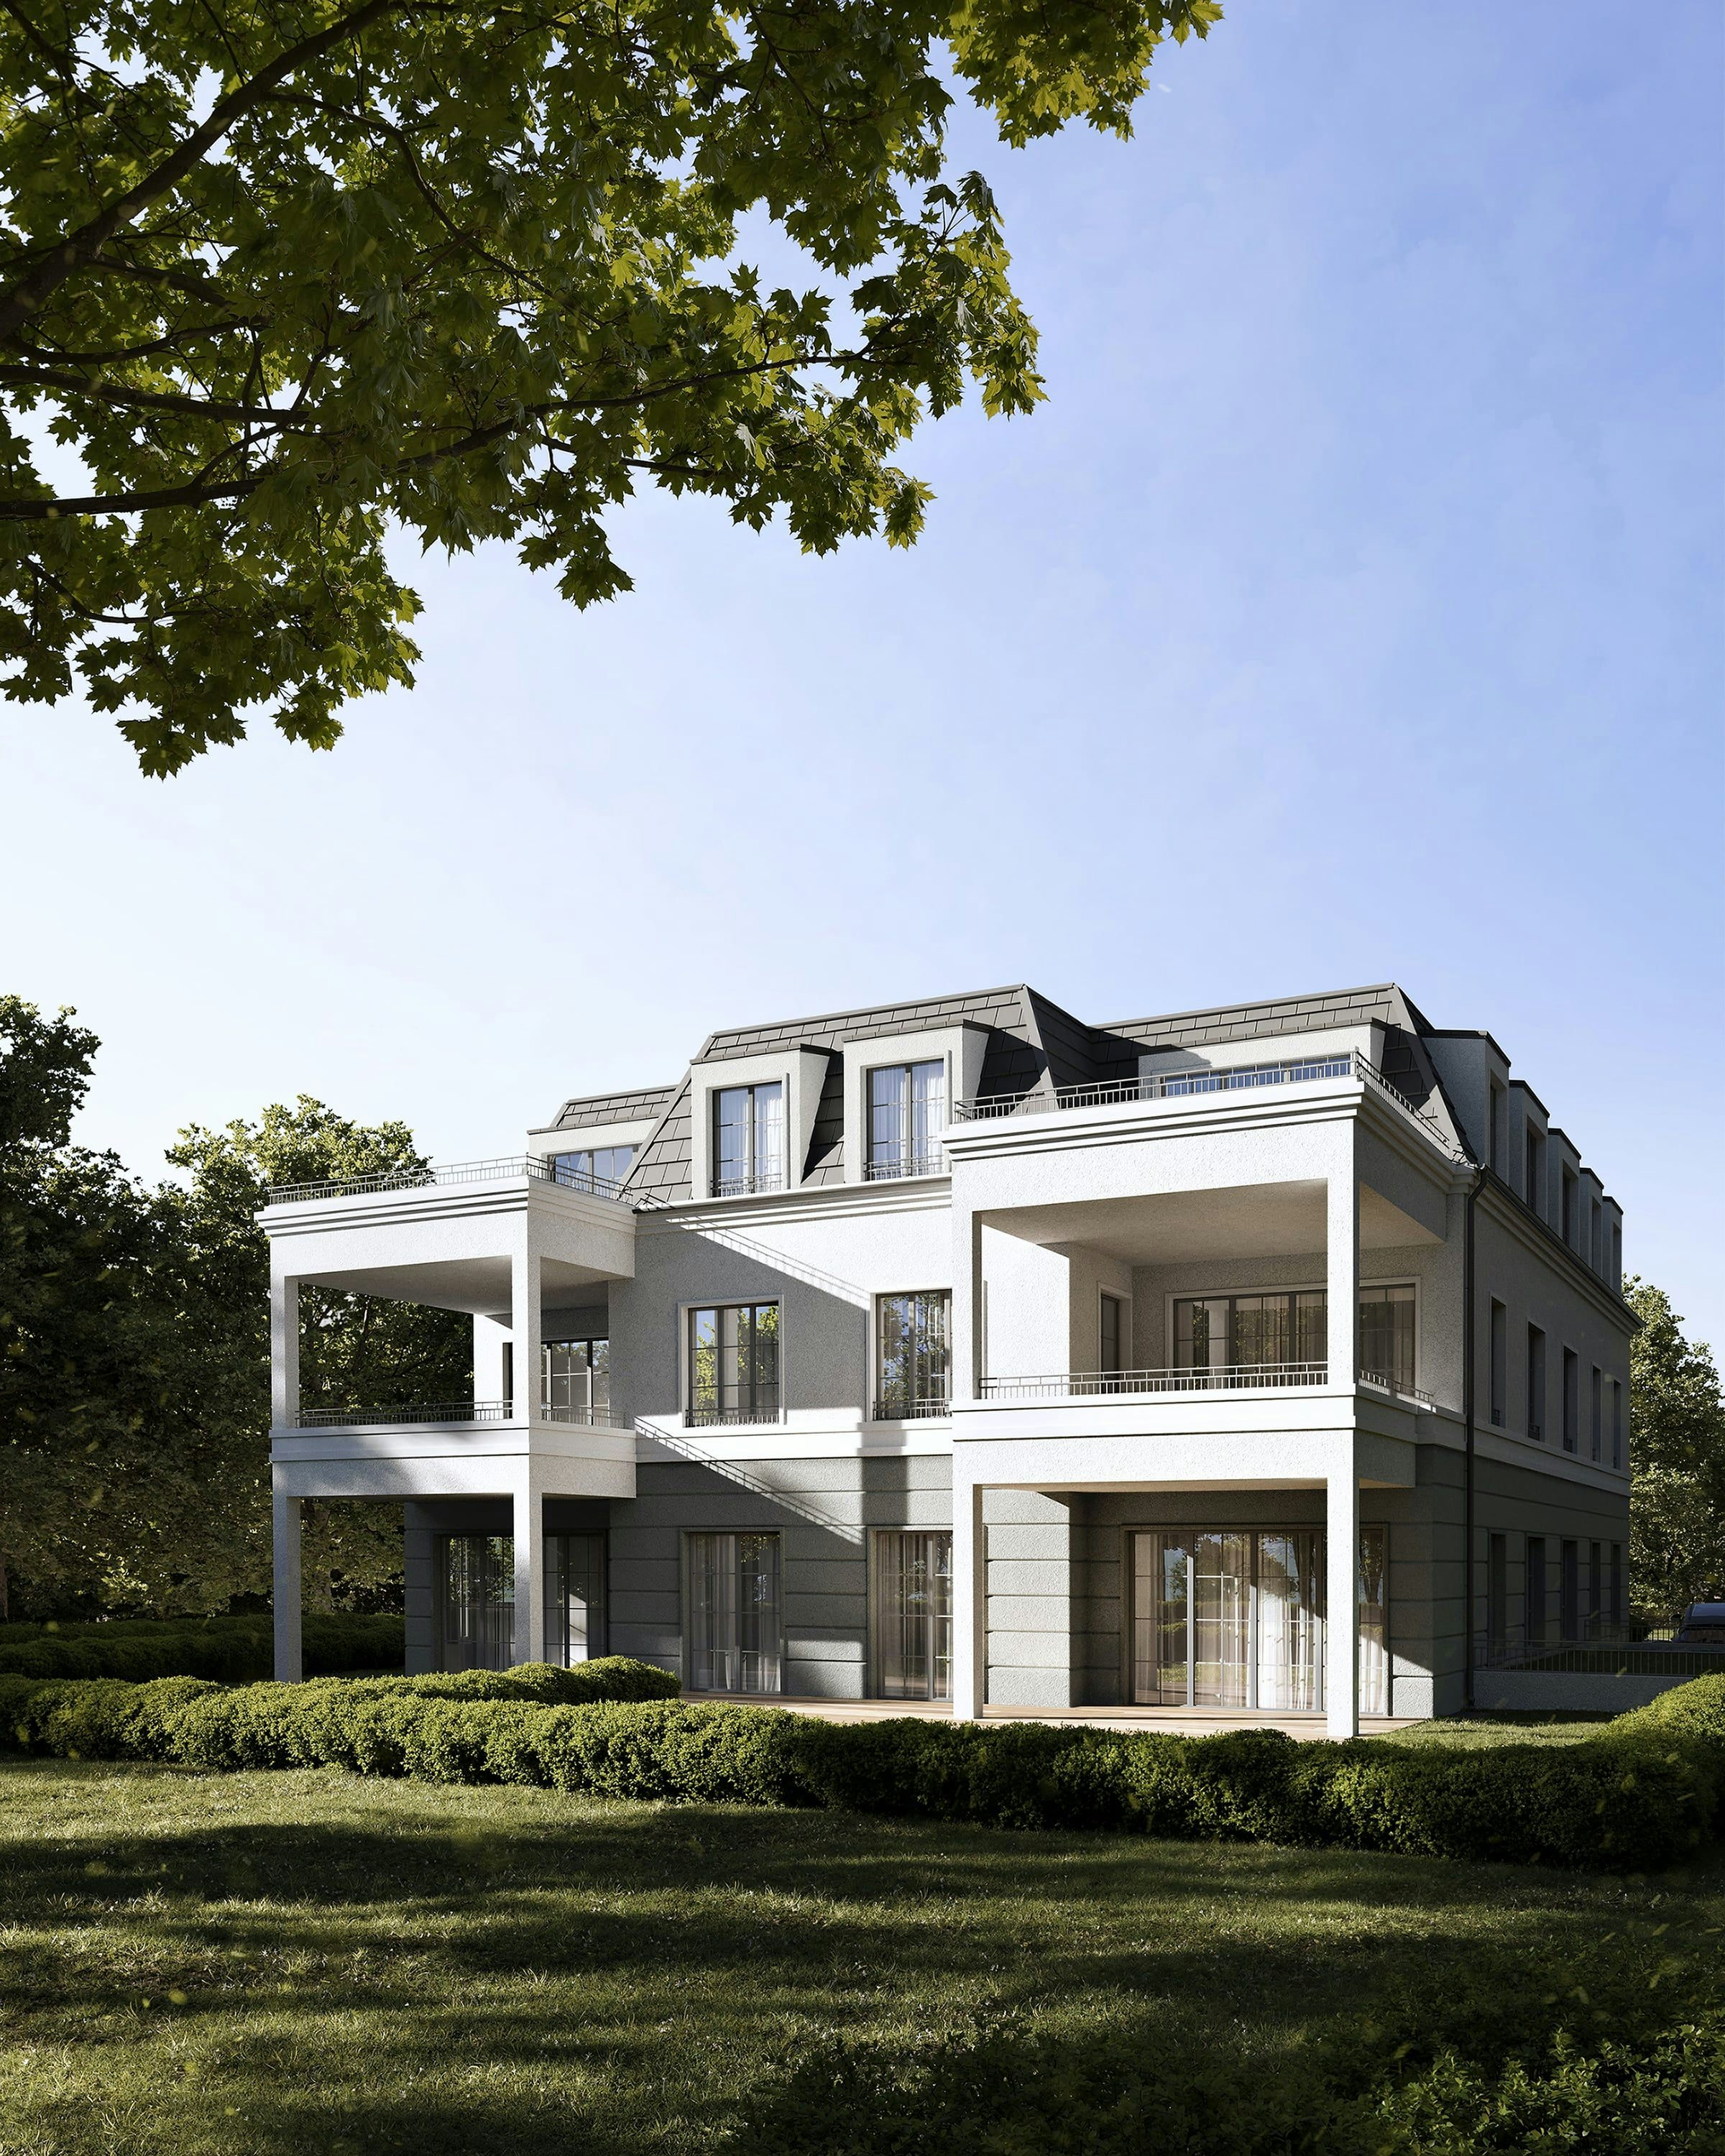 3D Exterior Visualization of multi family house with backyard in Potsdam, Germany